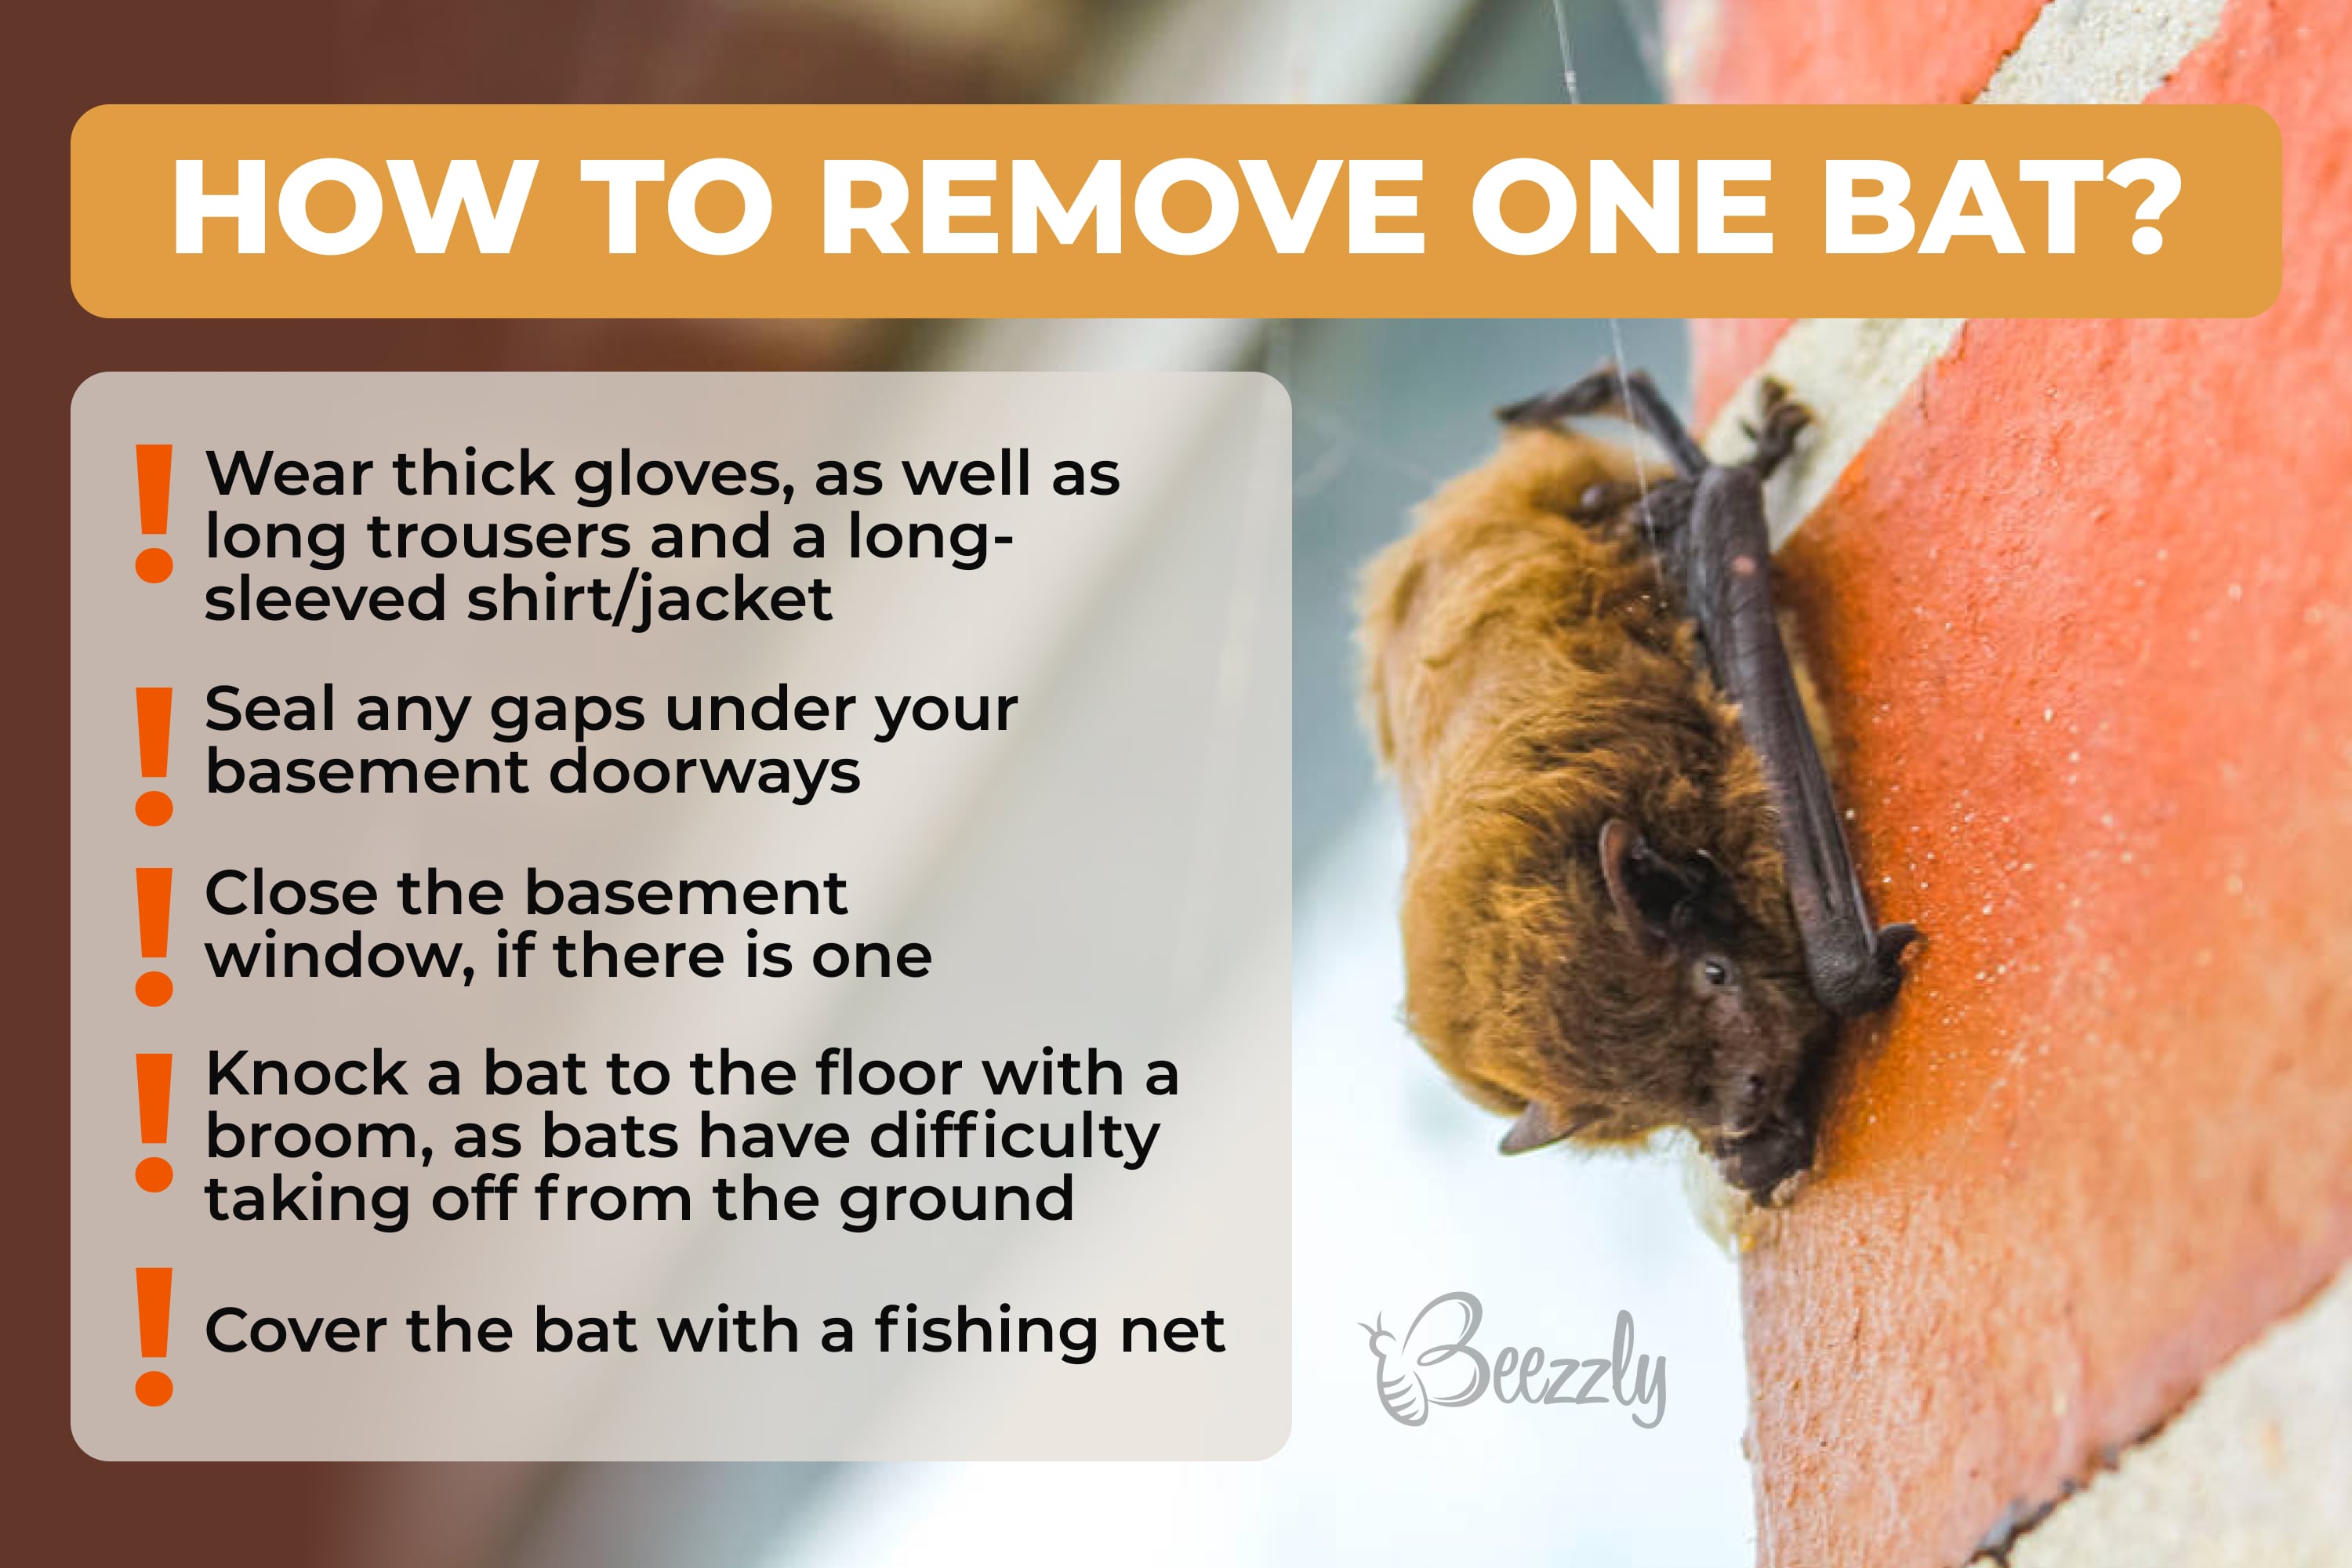 How to remove one bat